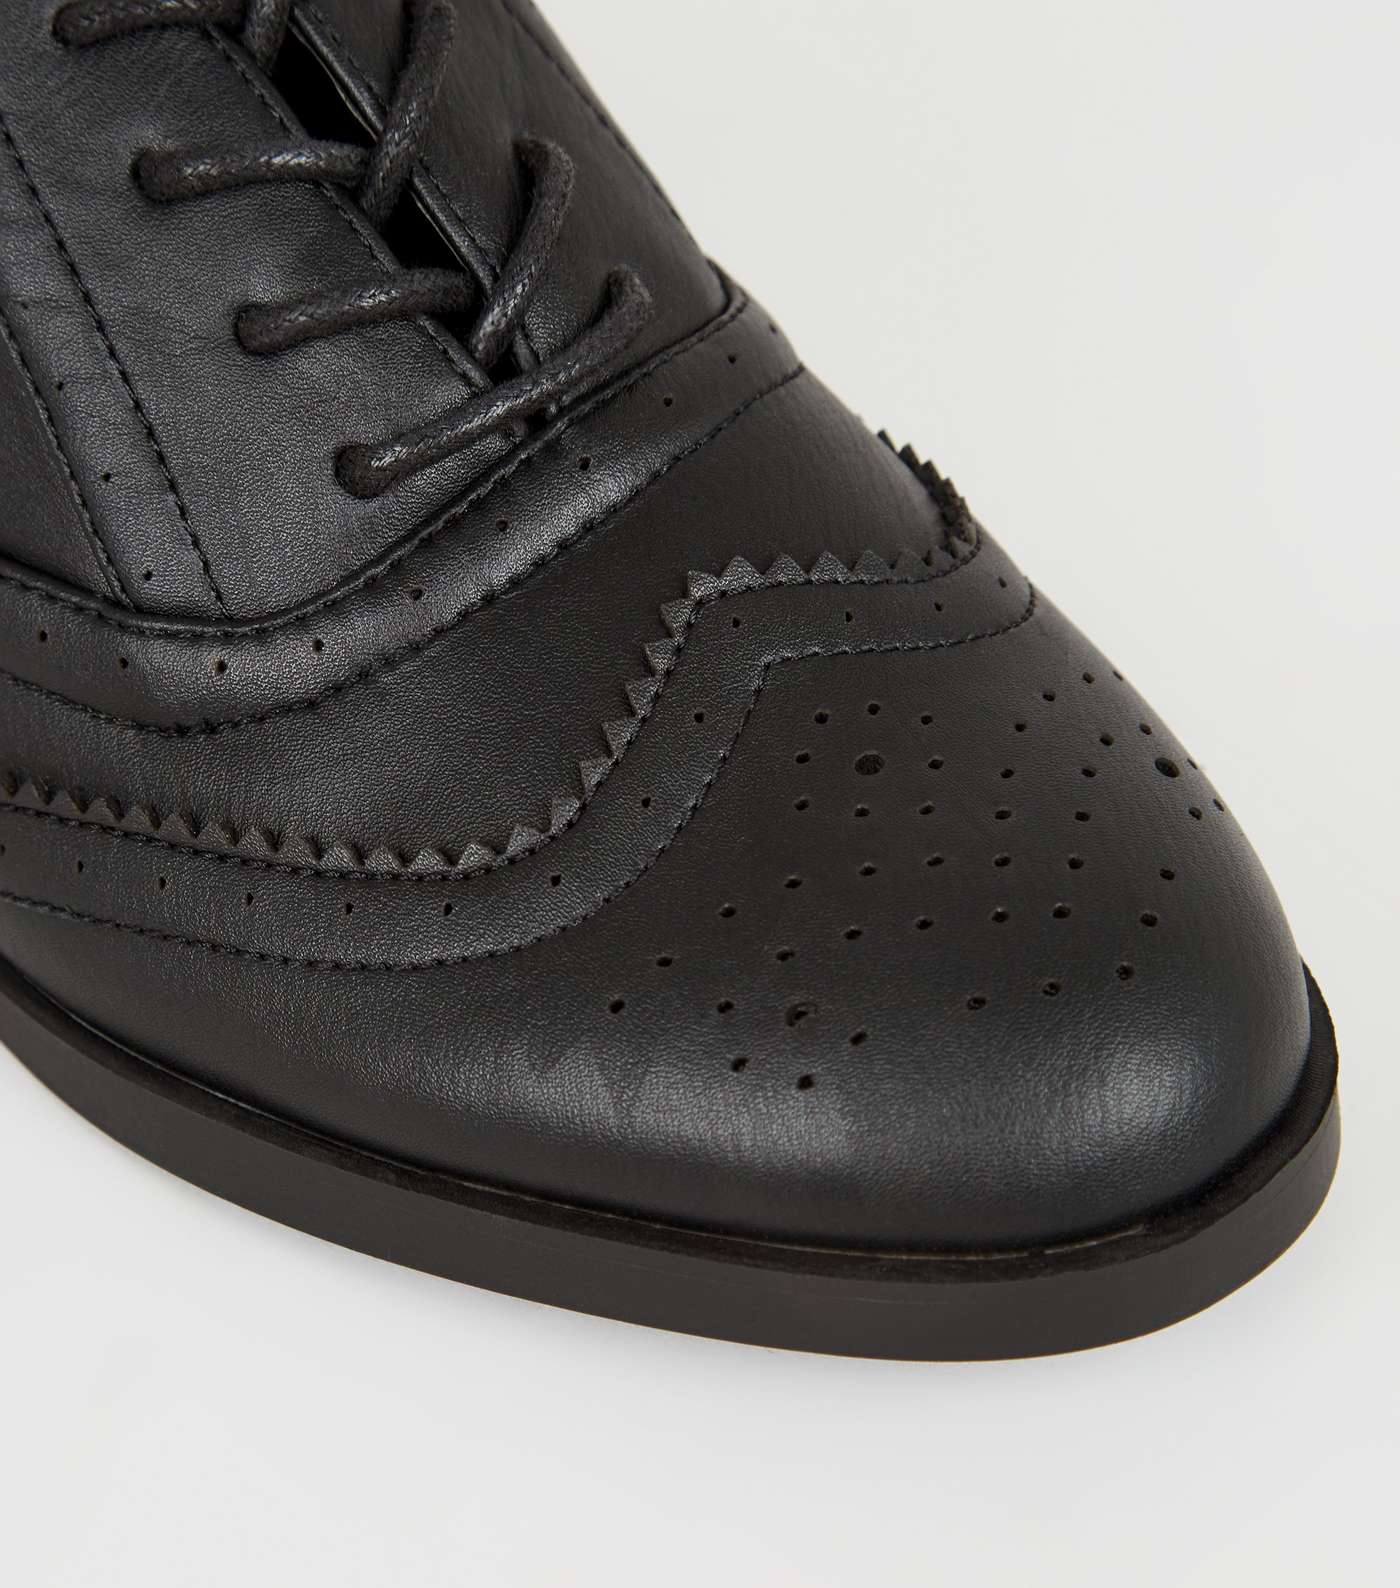 Girls Black Leather-Look Lace Up Brogues Image 3